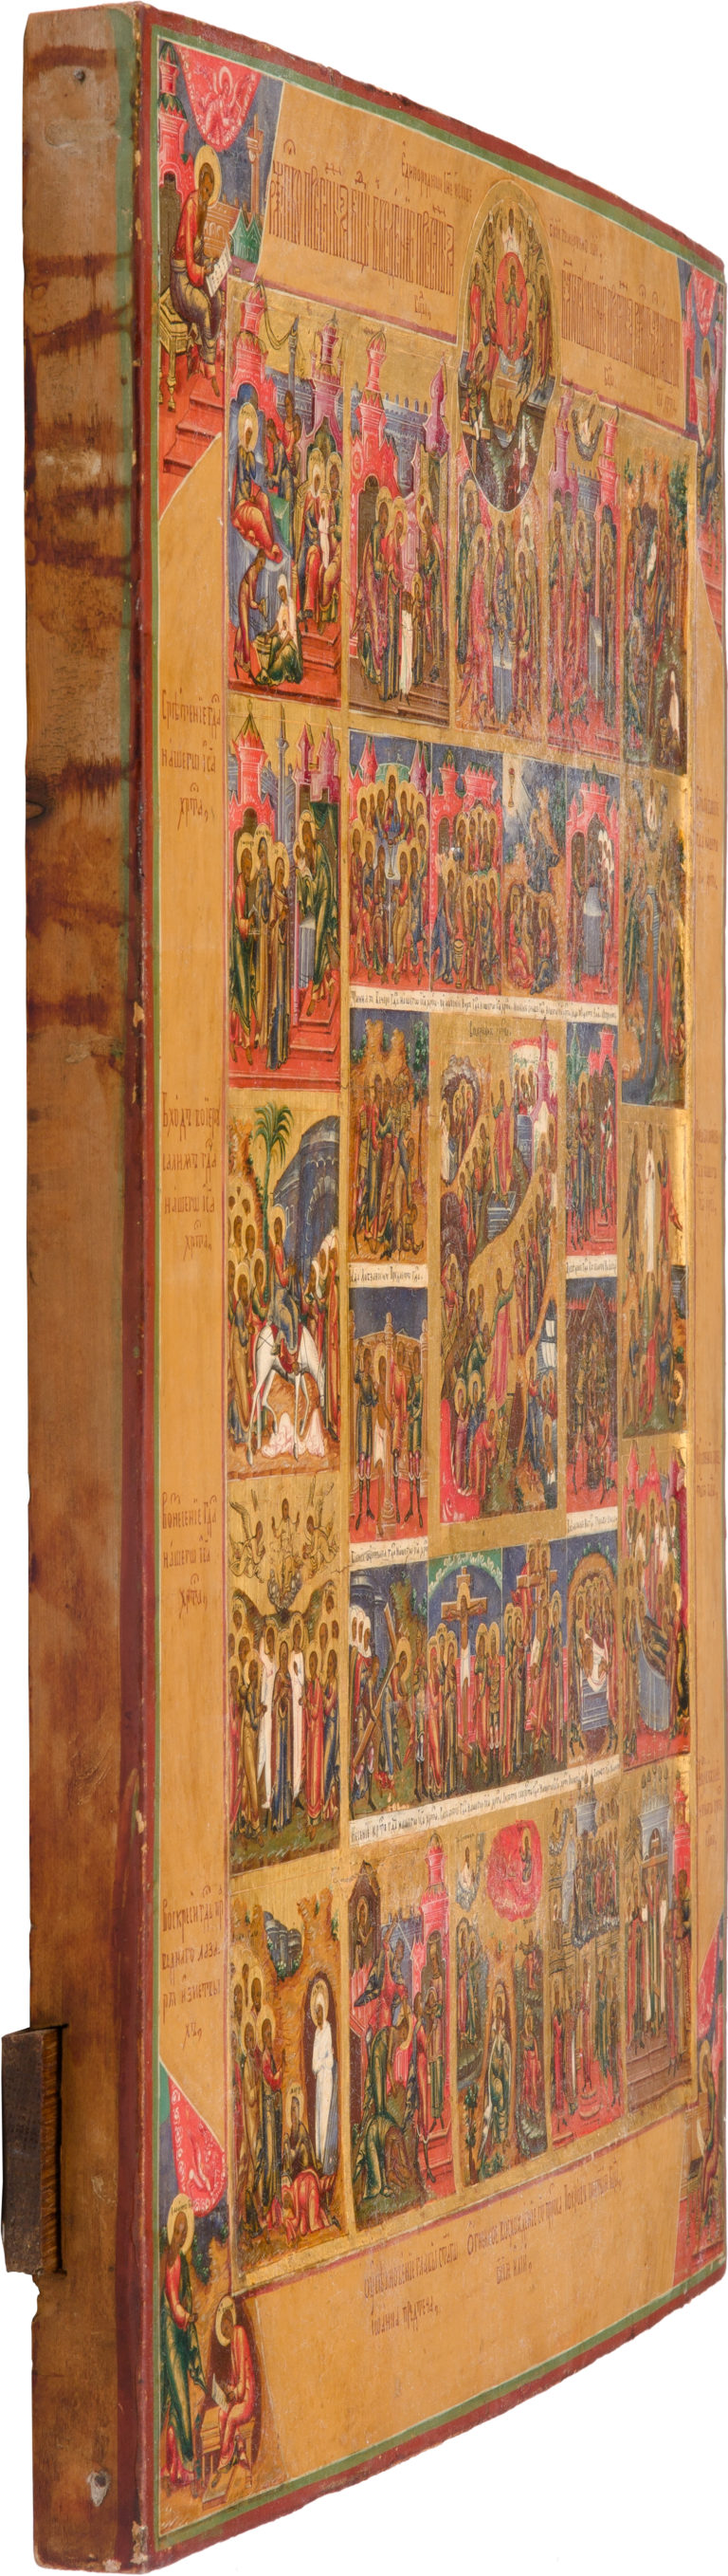 №32 The Resurrection – The Harrowing of Hades, with the Monogenis, the Passions of Christ, the Church Feasts, and the Four Evangelists in 28 border scenes